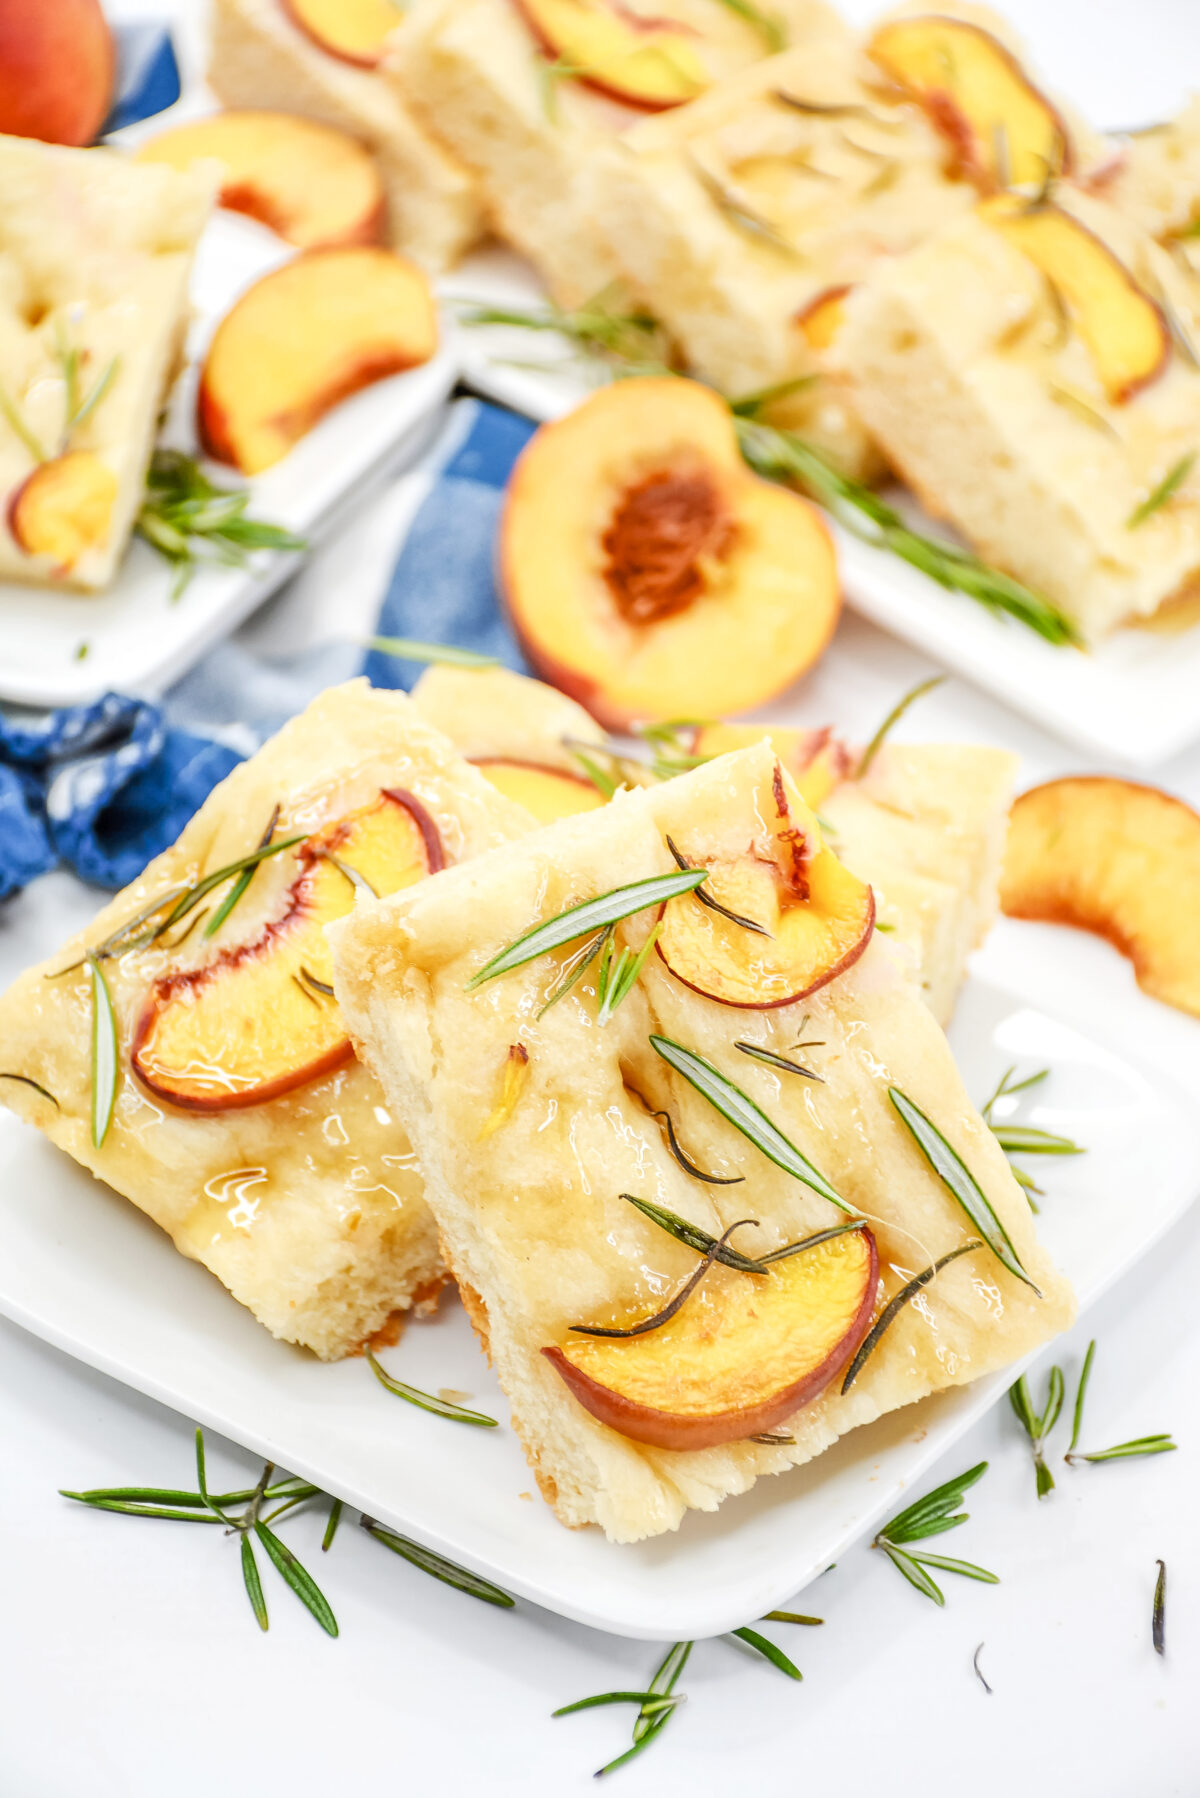 A delicious and easy peach and thyme focaccia bread recipe that will make your taste buds happy! It's a great way to use up ripe peaches.